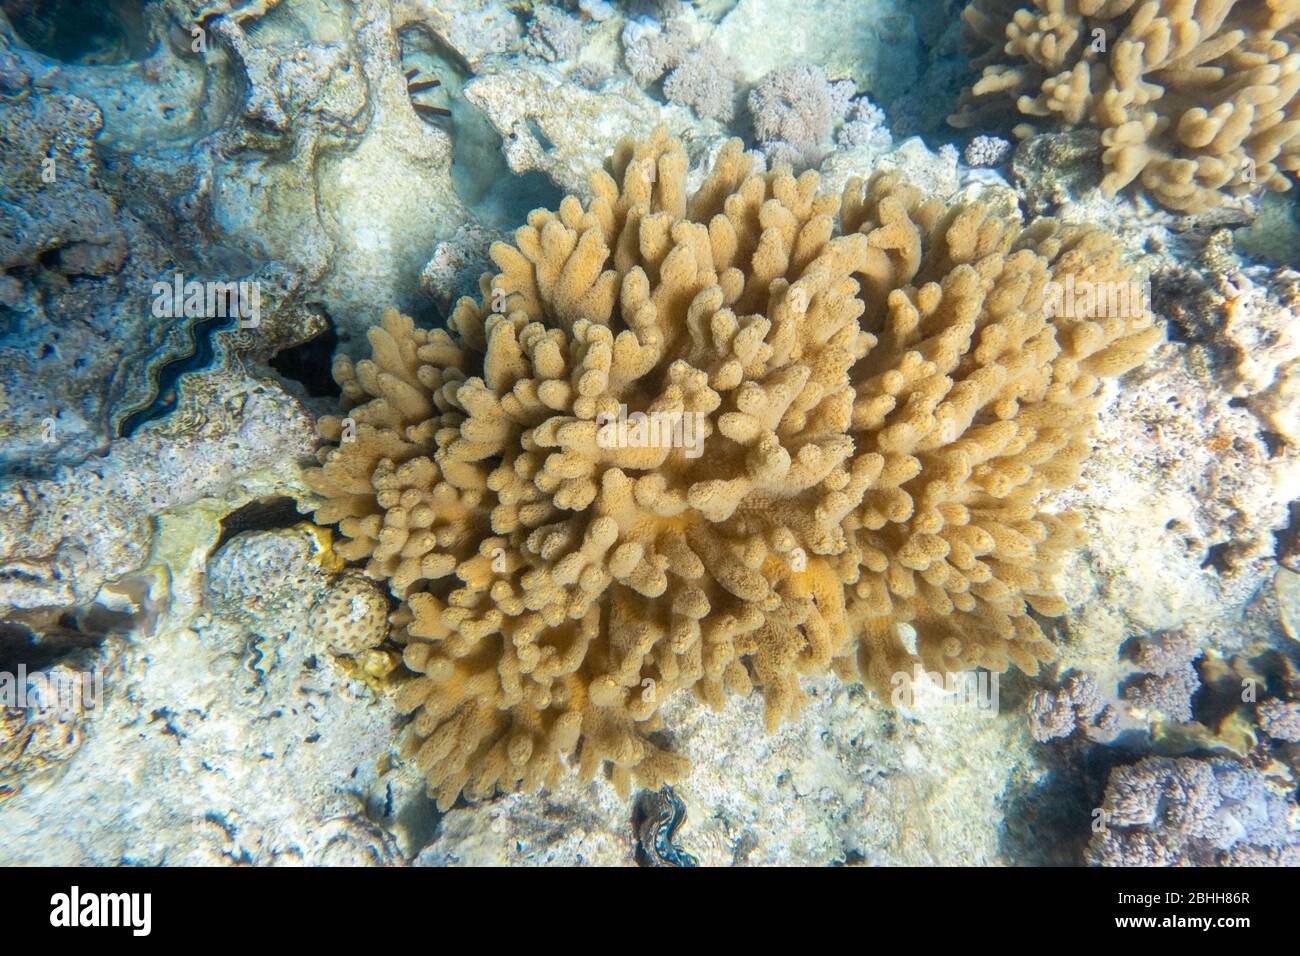 Deep Sea Coral Polyps, Marine Life On The Ocean Floor. Saltwater Creatures  In a Coral Reef, Red Sea, Egypt Stock Photo - Alamy